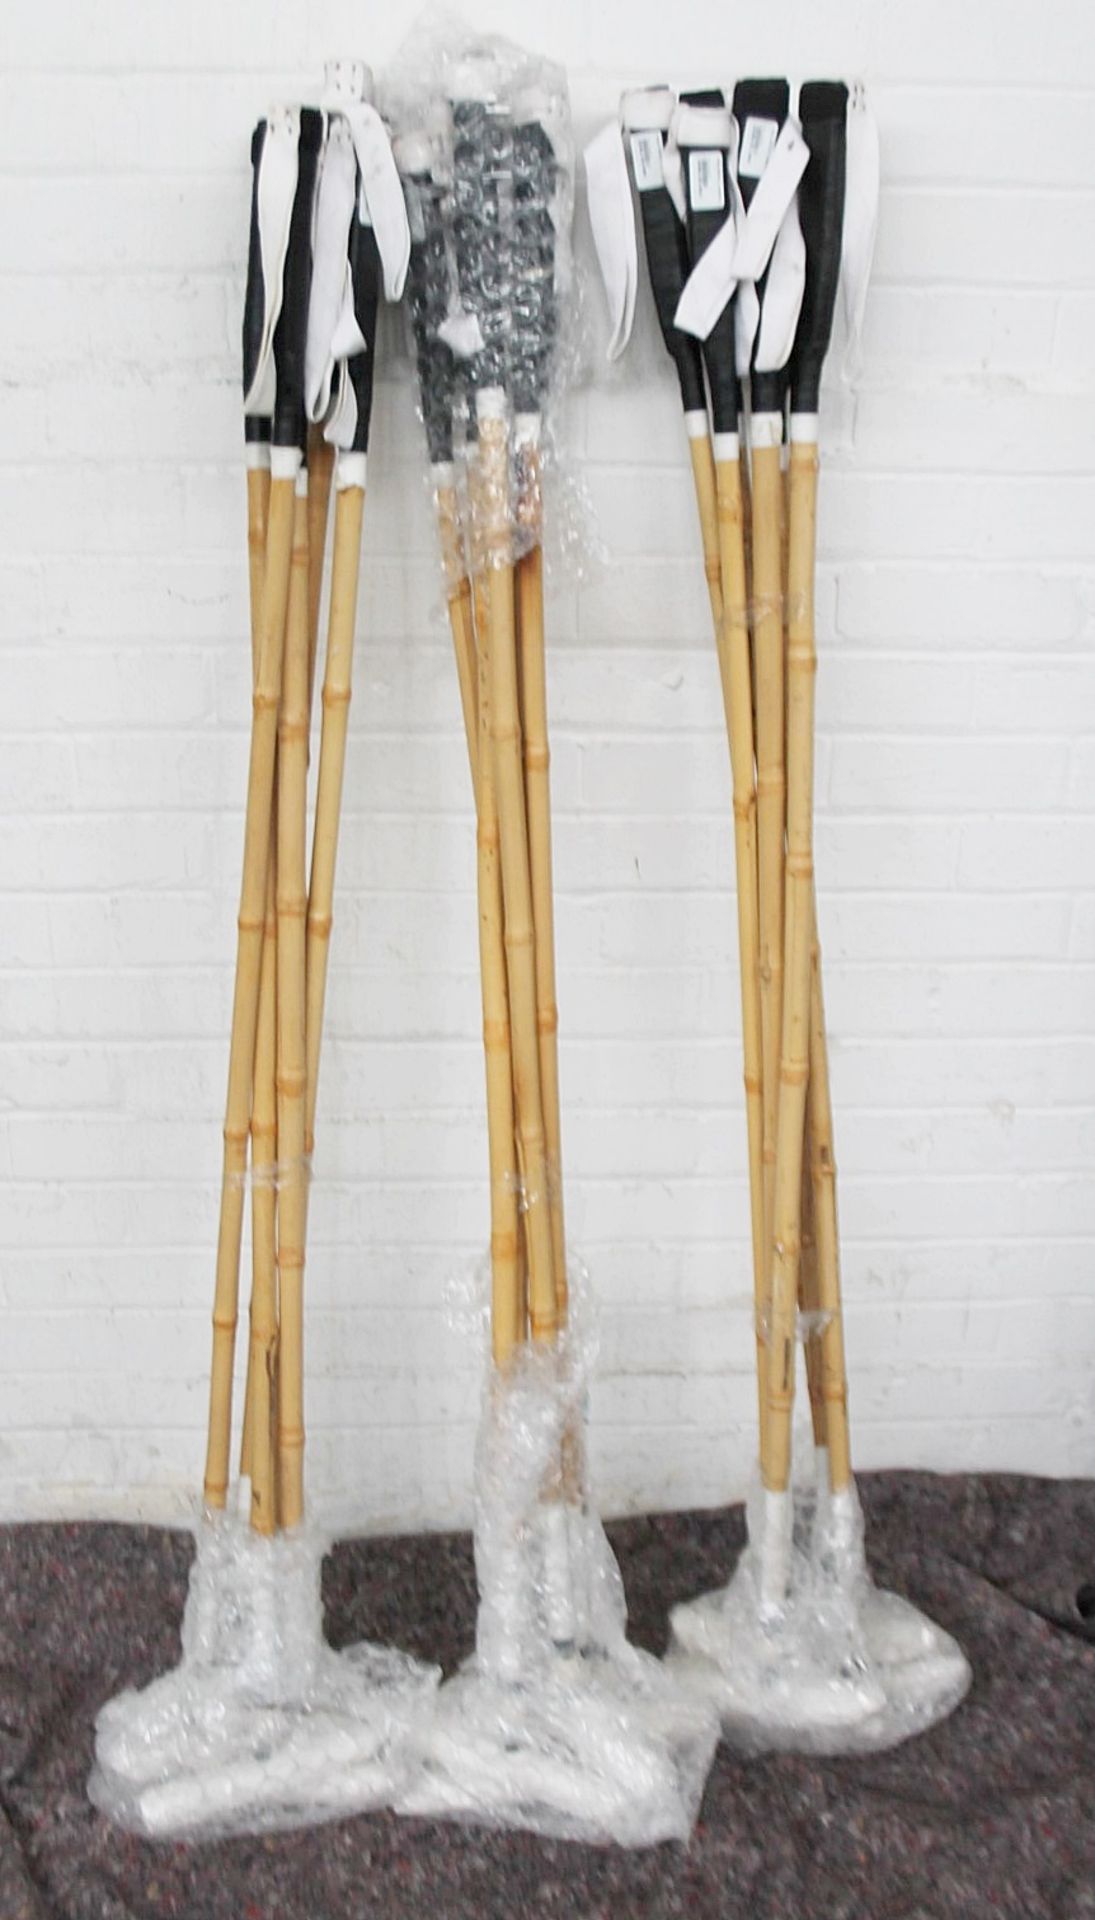 16 x Bamboo Cane POLO Mallets - Recently Removed From A World-renowned London Department Store